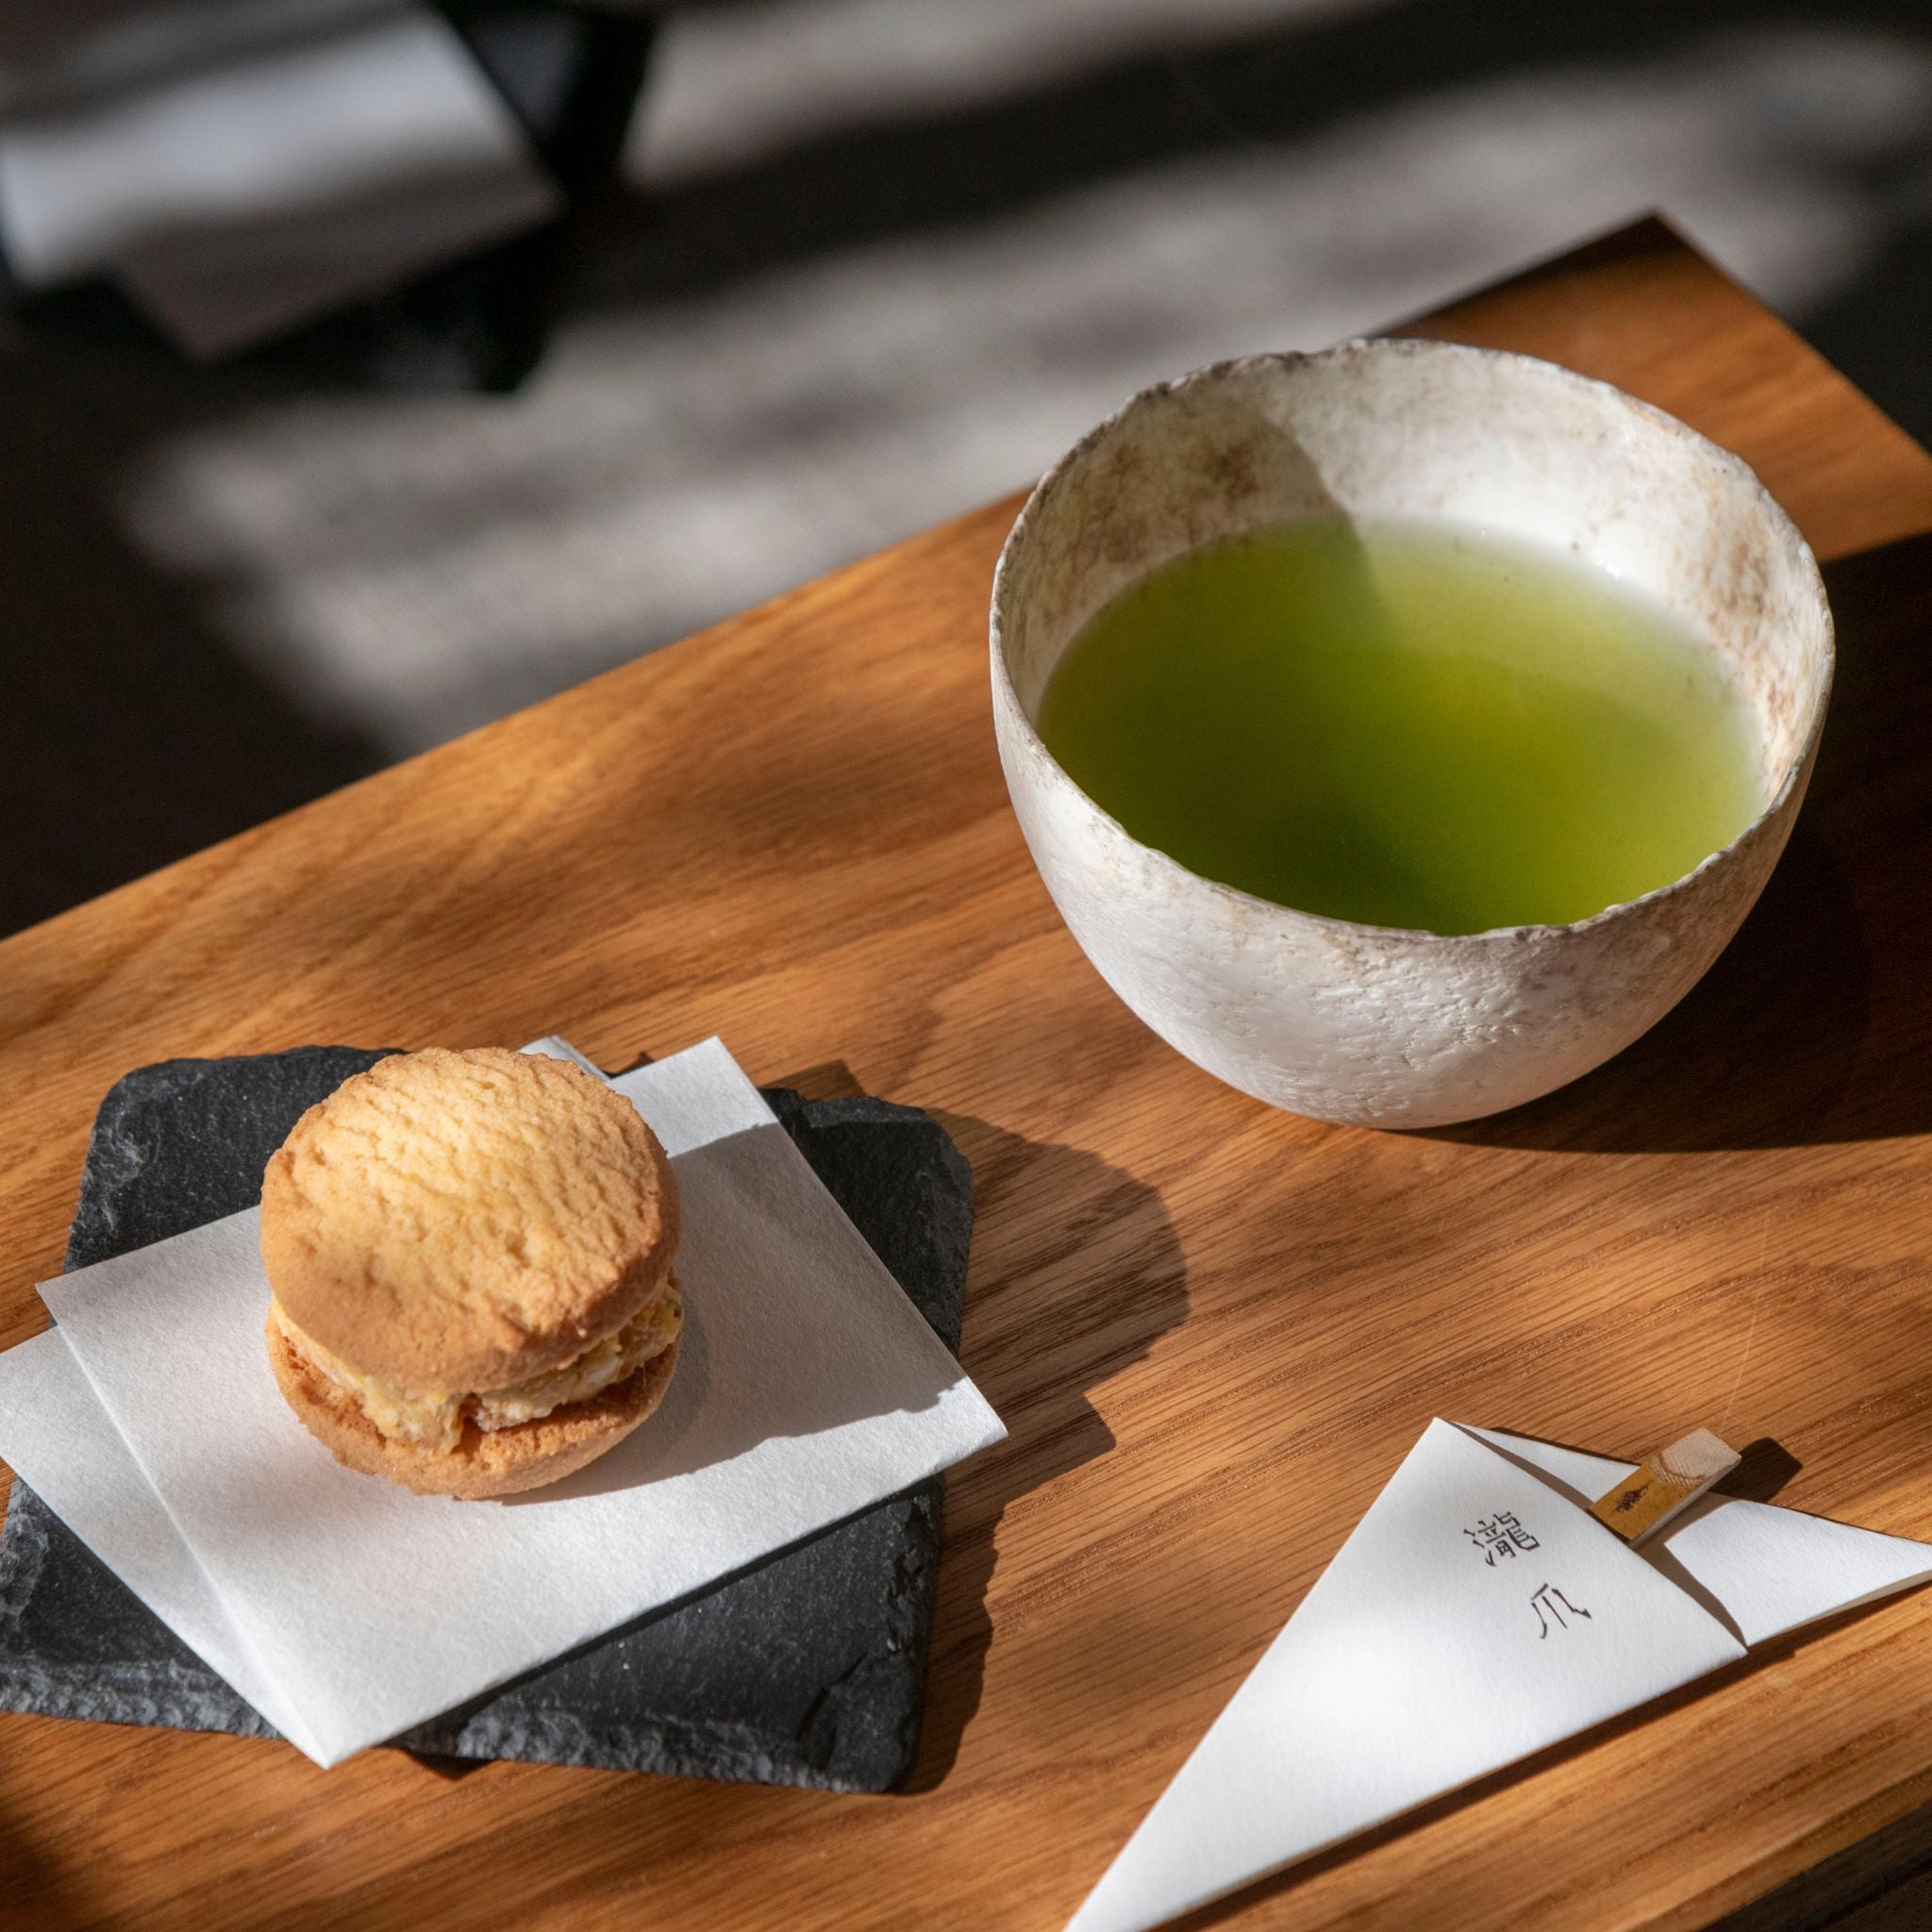 【Balancing Tea -Session in Japanese- 】 Three kinds of tea served with seasonal sweets